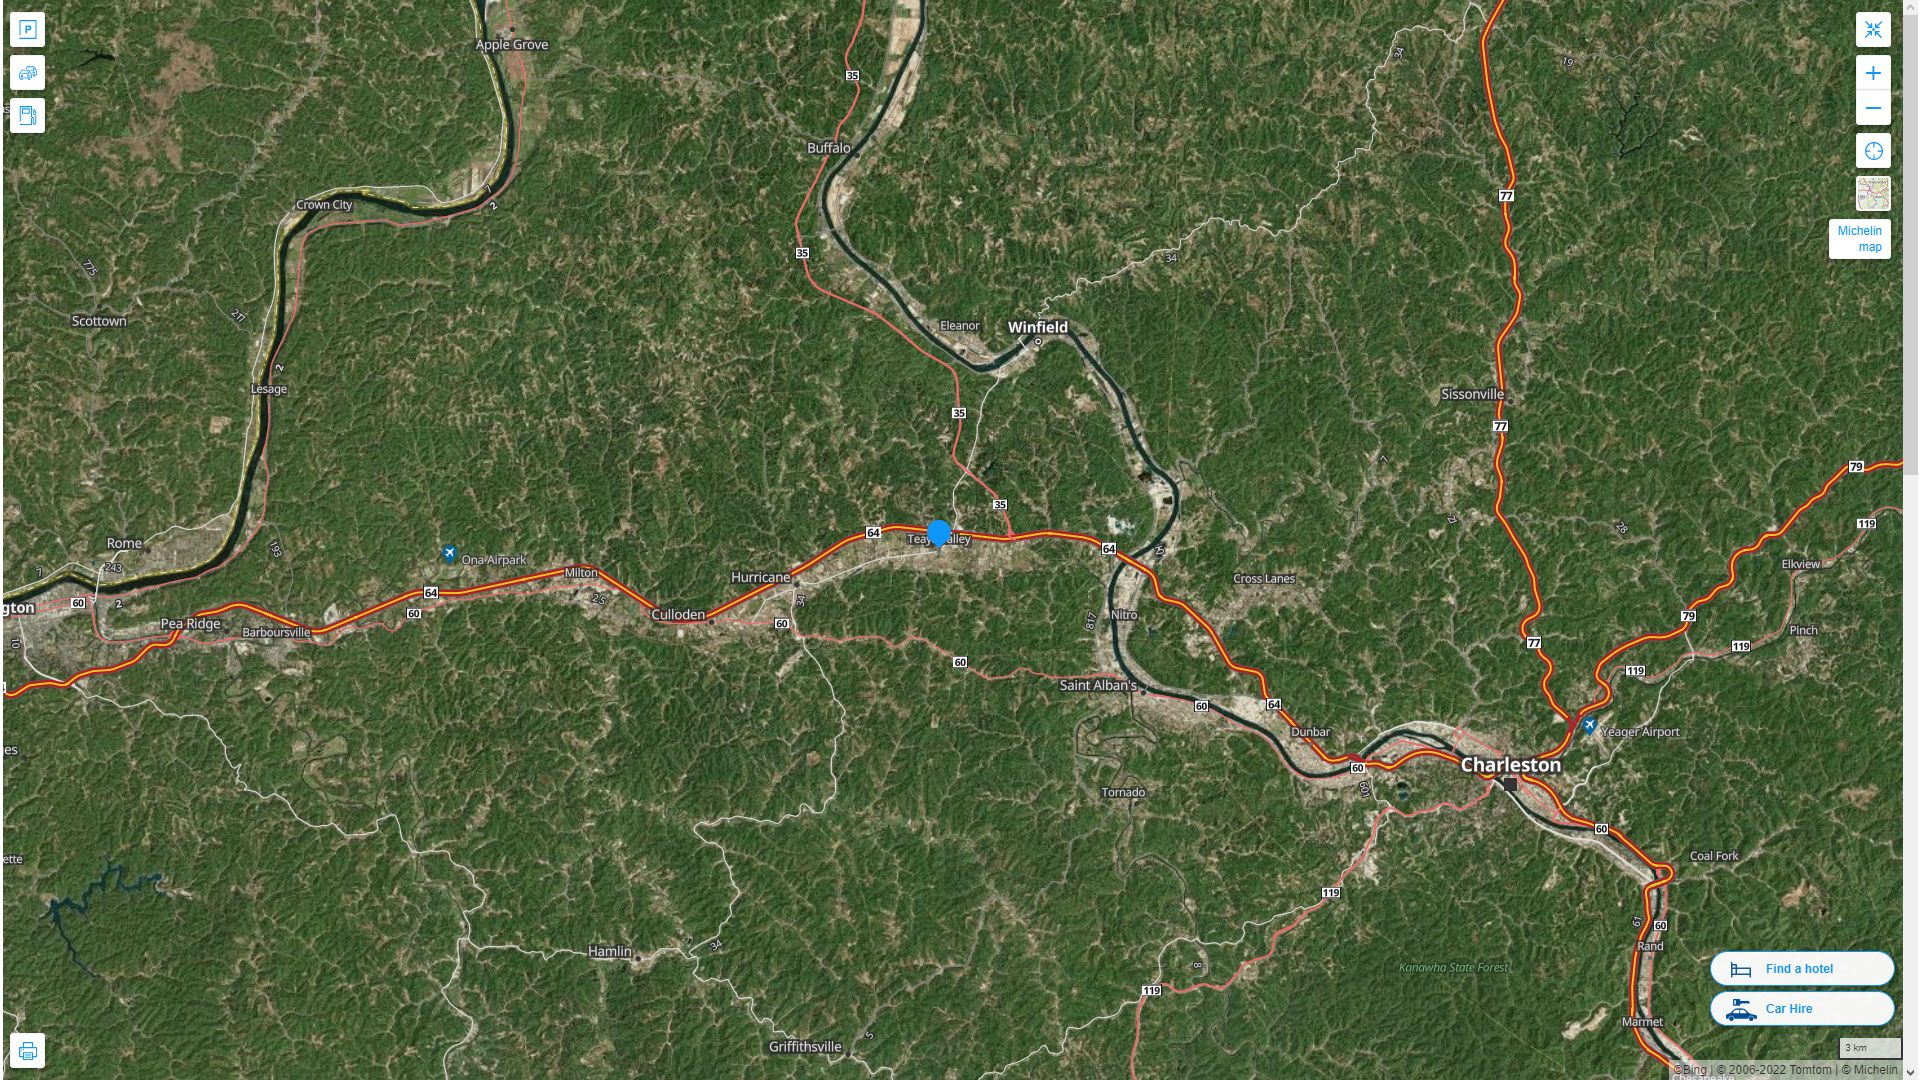 Teays Valley West Virginia Highway and Road Map with Satellite View